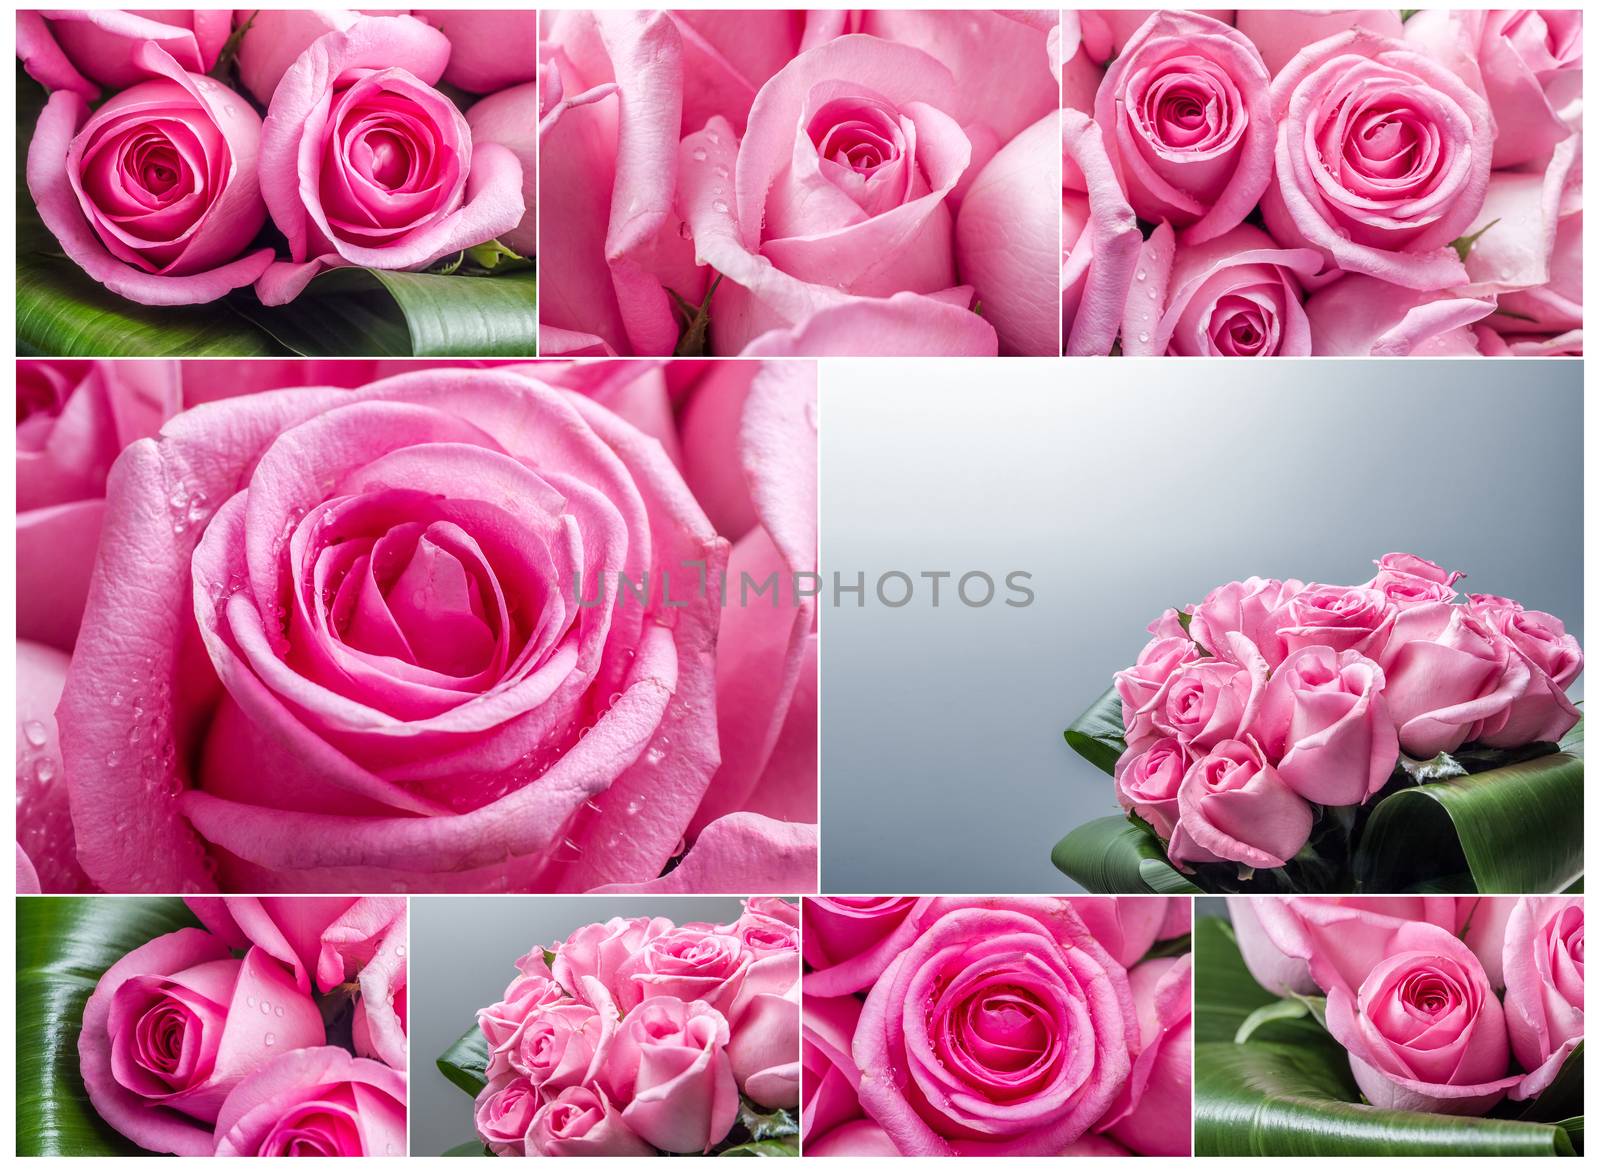 Collage of beautiful pink roses